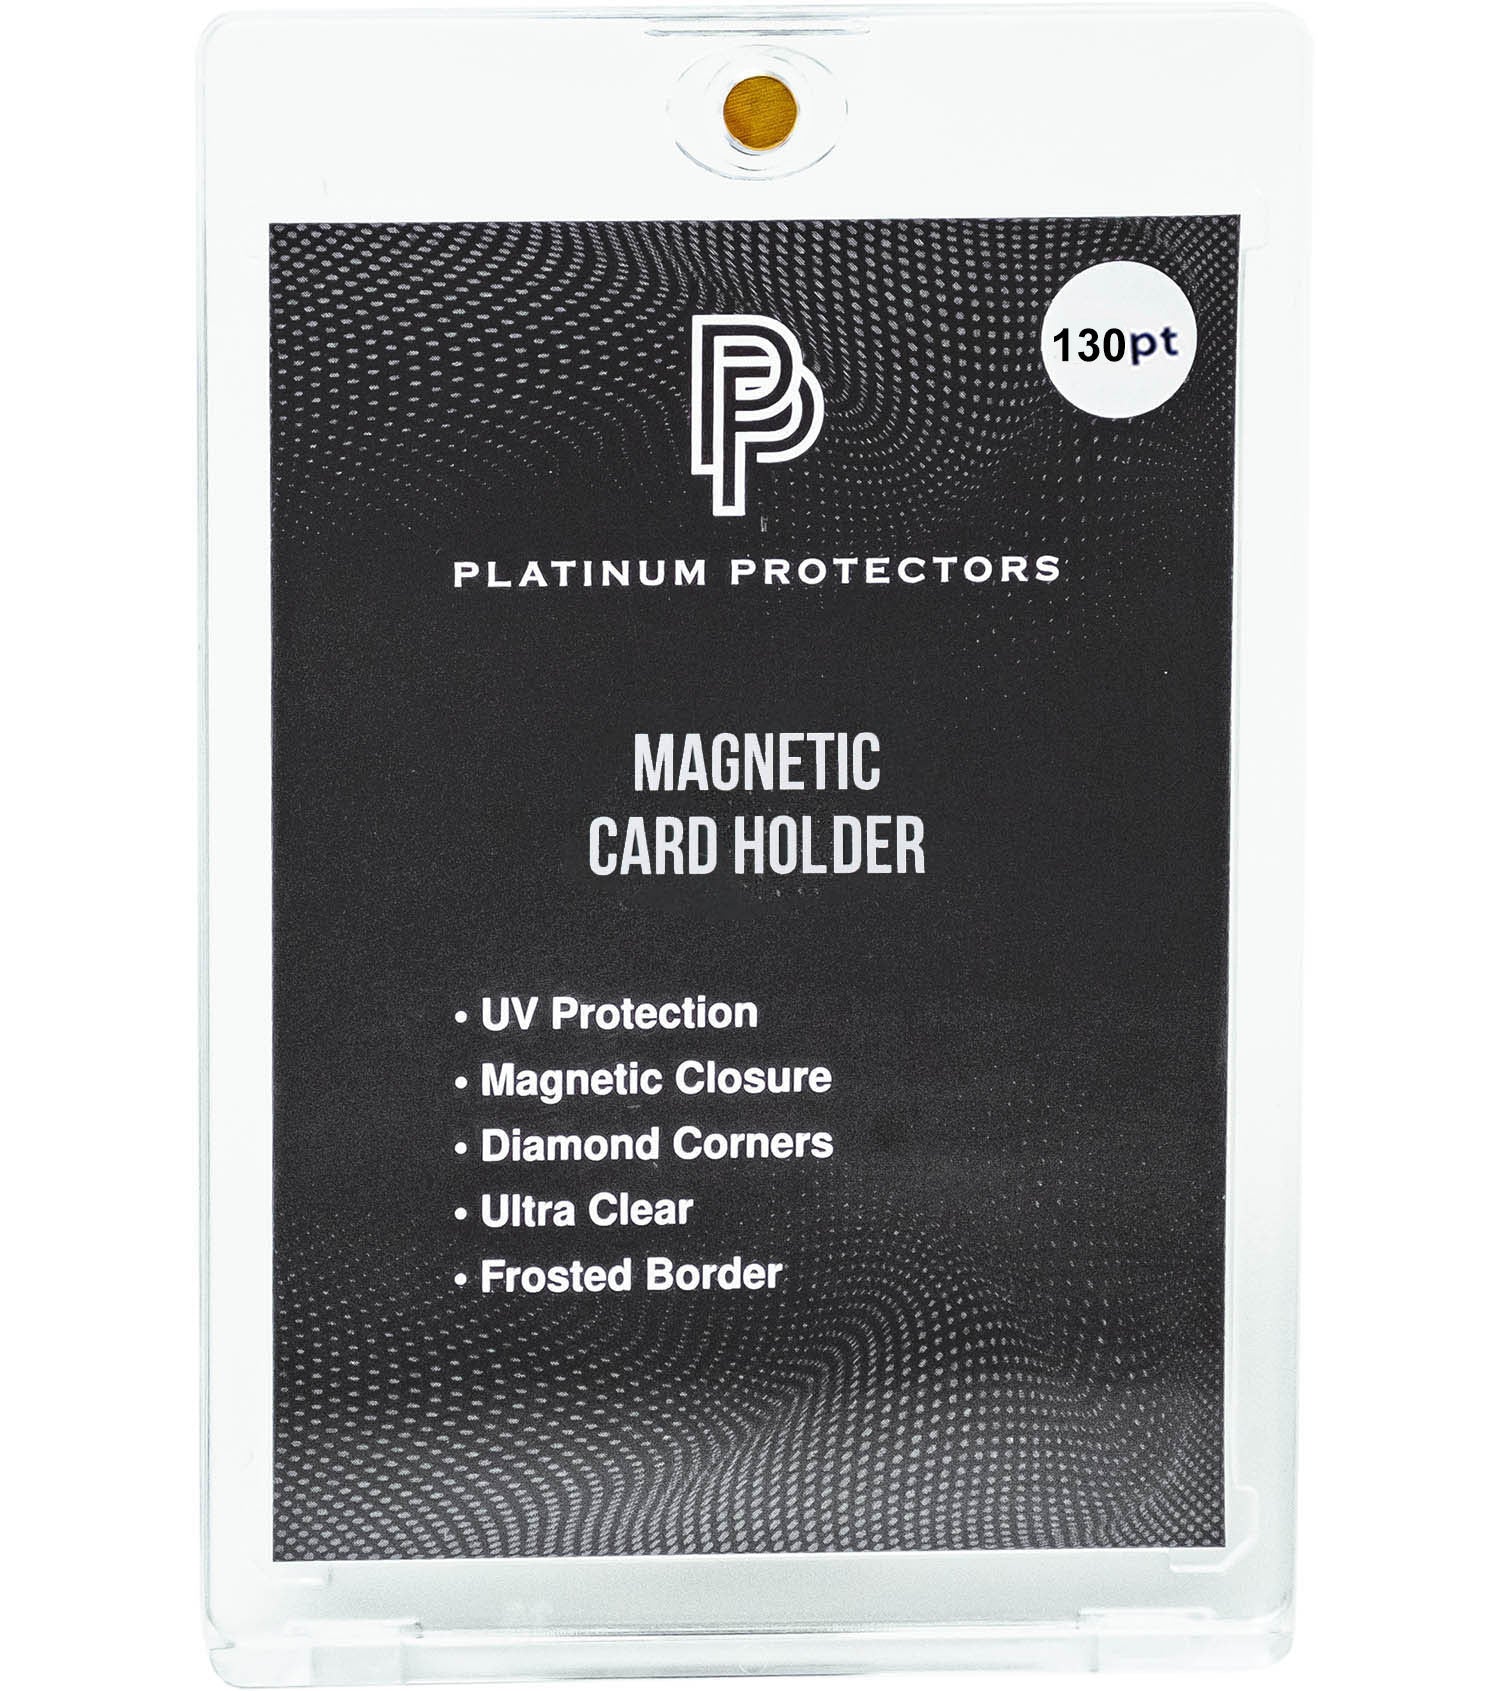 Platinum Protectors Magnetic Card Holders for Trading Cards - 130 pt